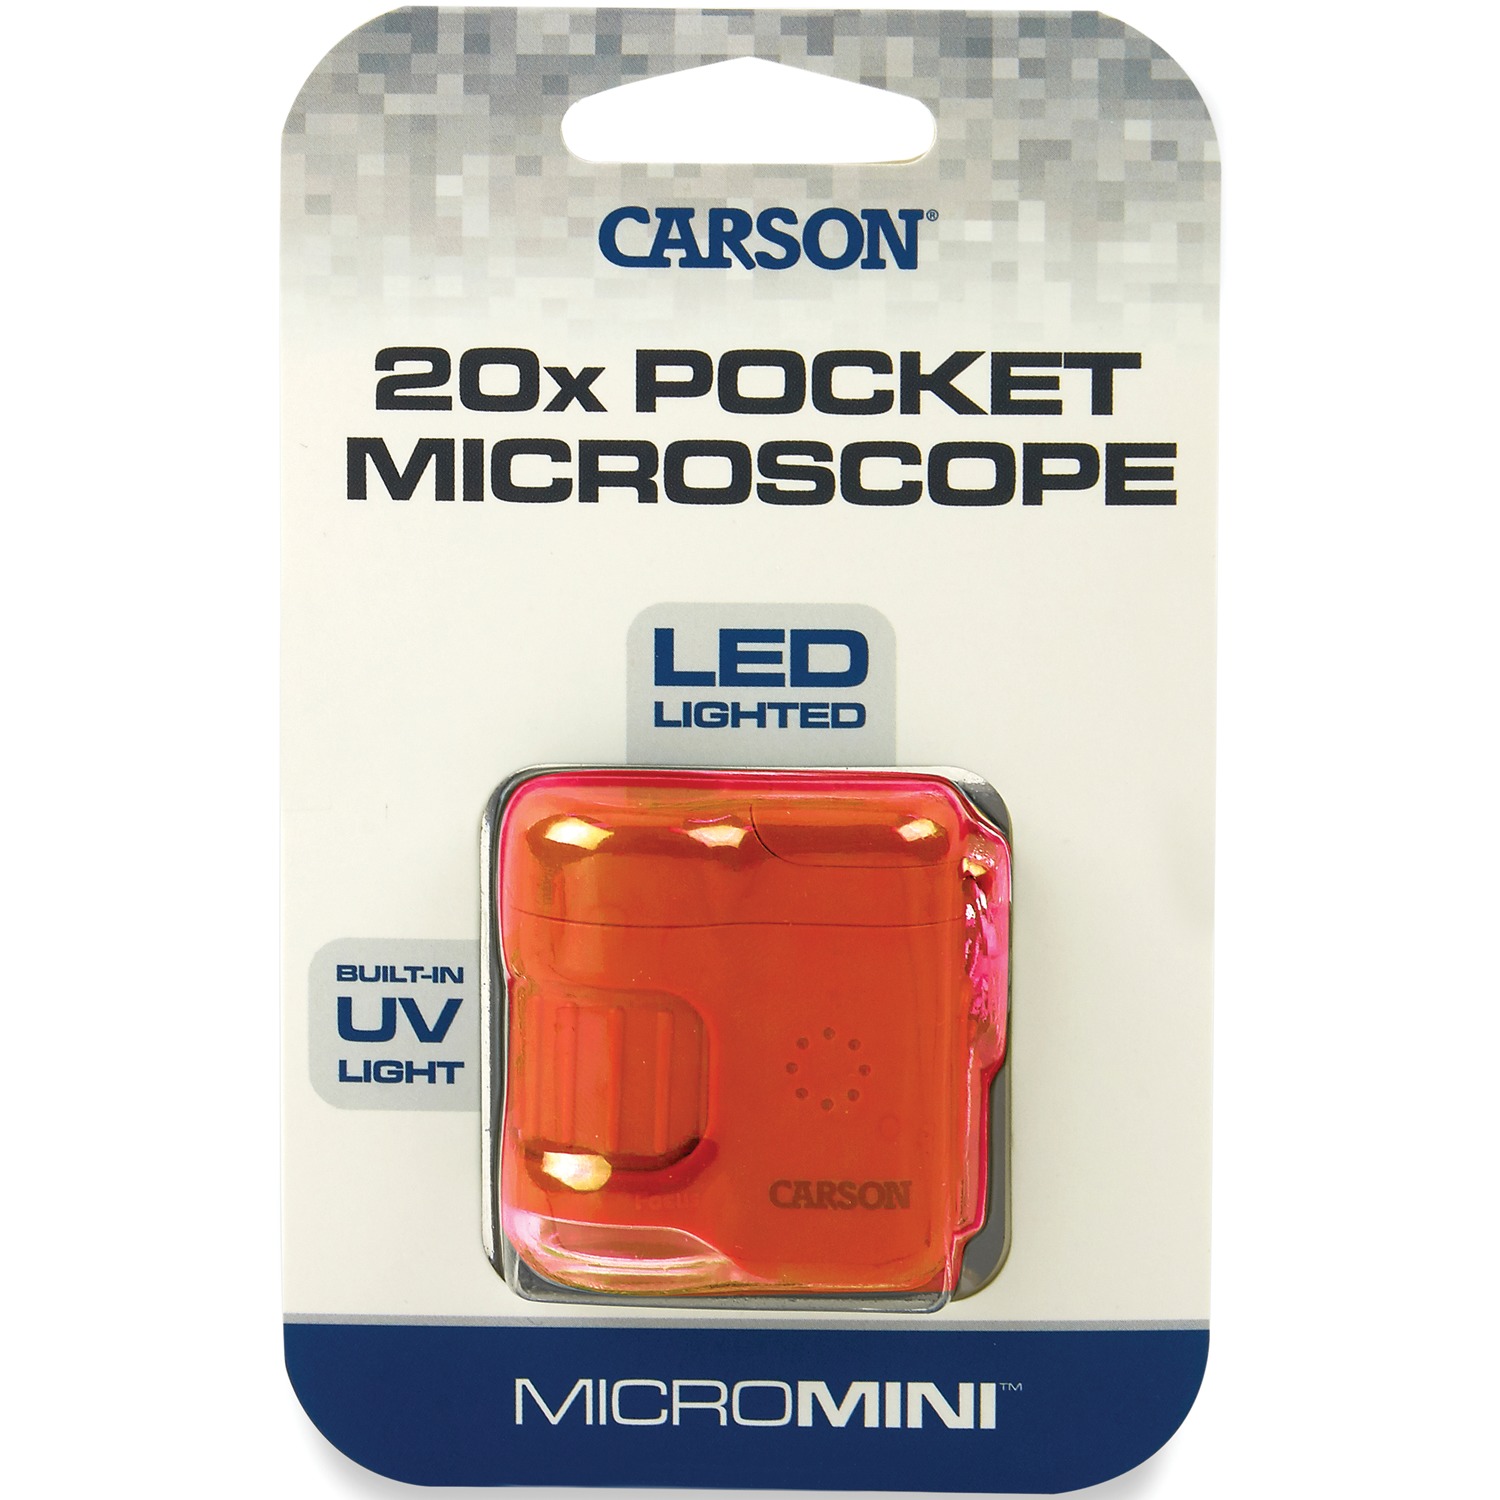 Carson MicroMini™ 20x LED Lighted Pocket Microscope with Built-In UV and LED Flashlight, Orange - image 4 of 9